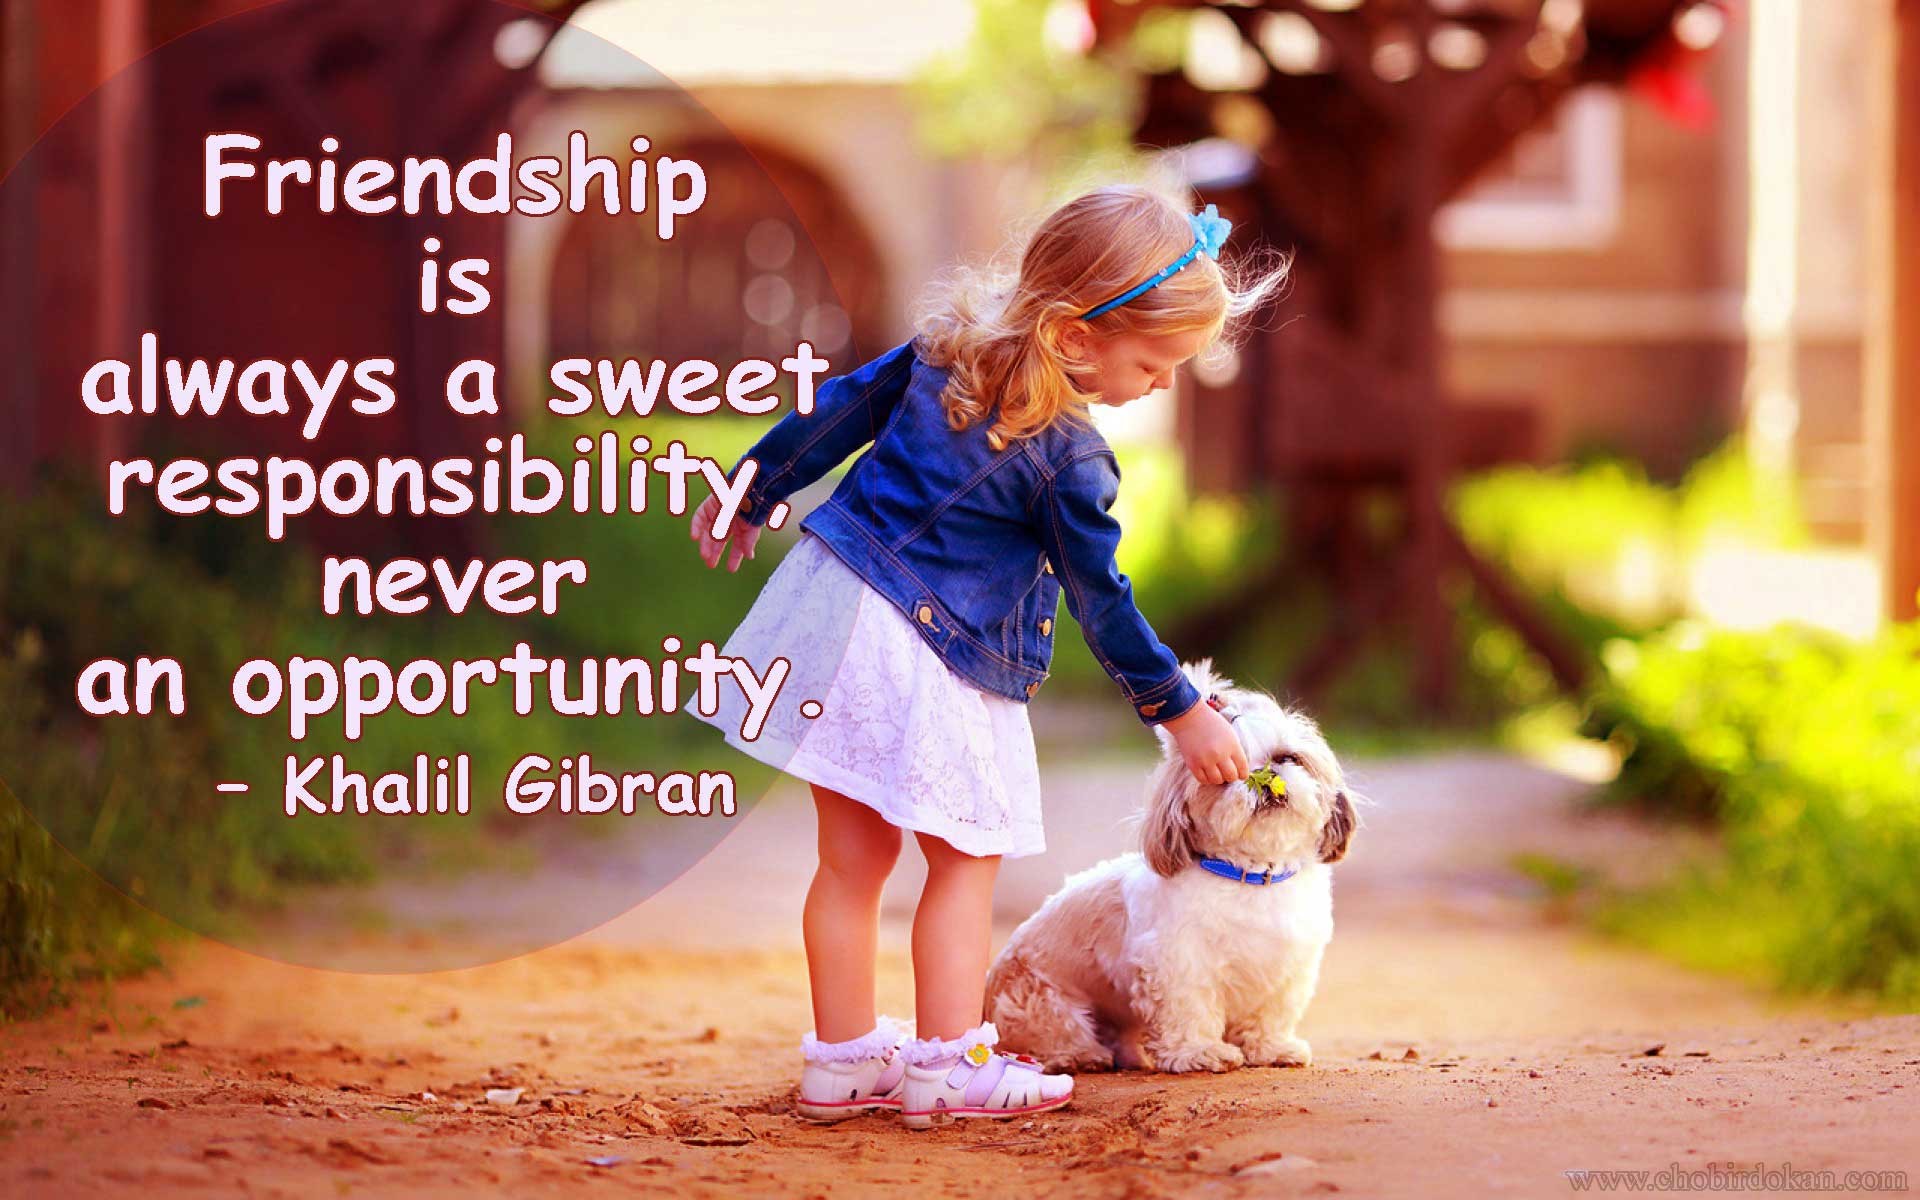 1920x1200 friendship image with quote